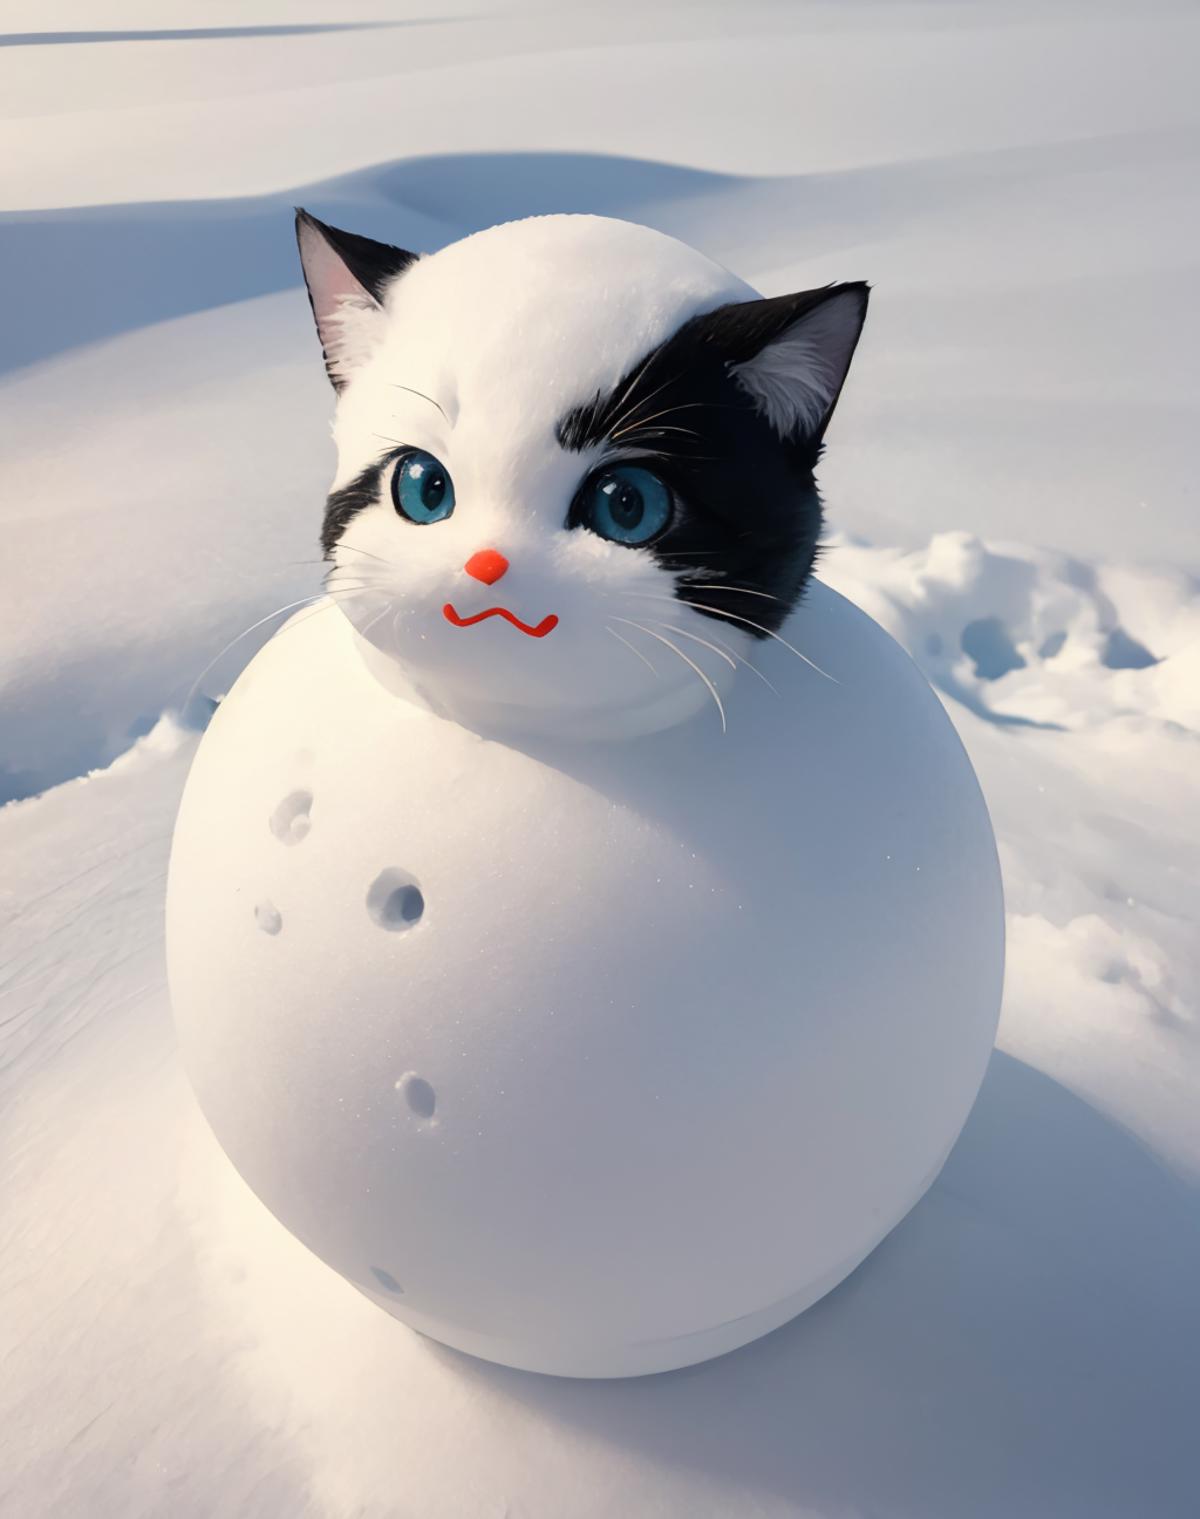 A black and white cat with blue eyes sitting on top of a snowball.